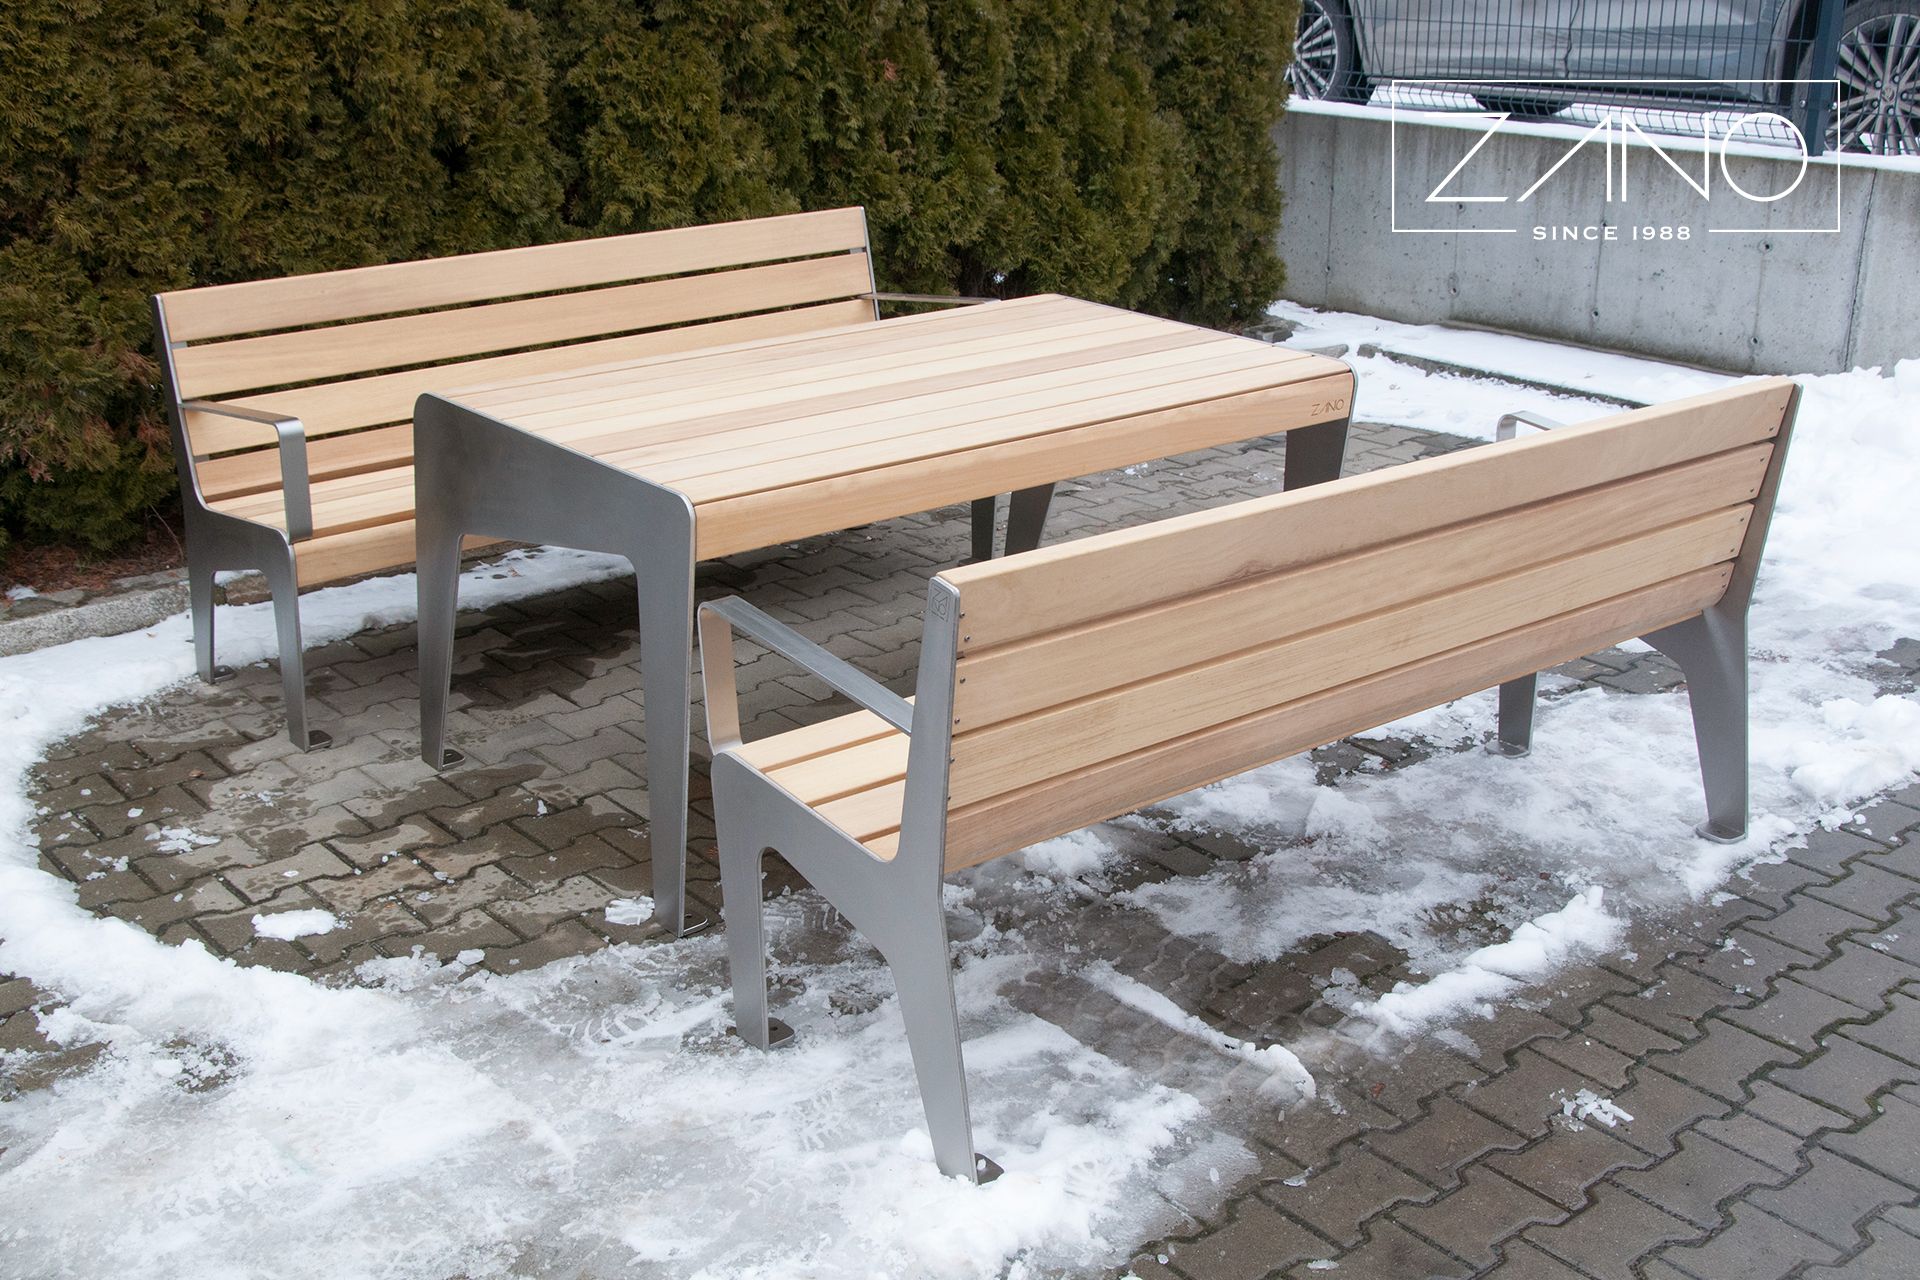 Street furniture made of hardwood and stainless steel